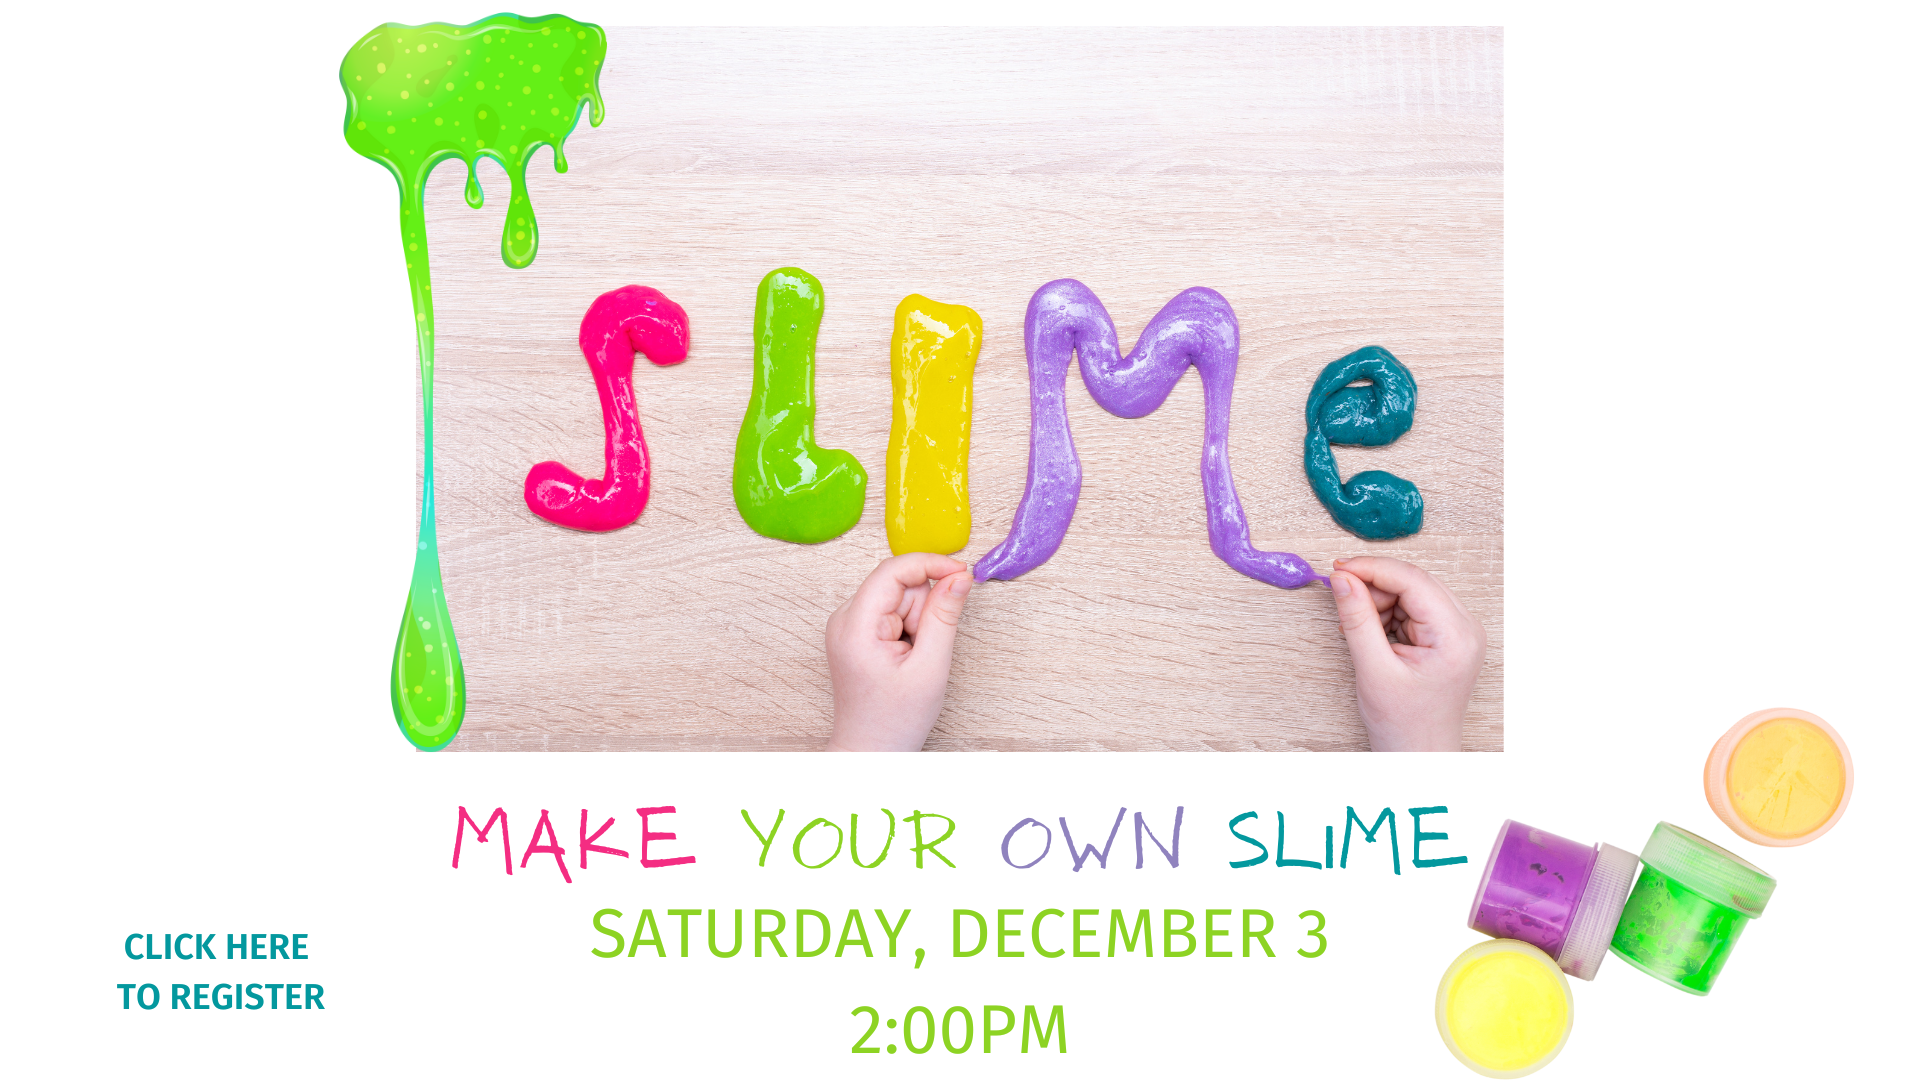 FB Make your own slime 12.3.22  .png